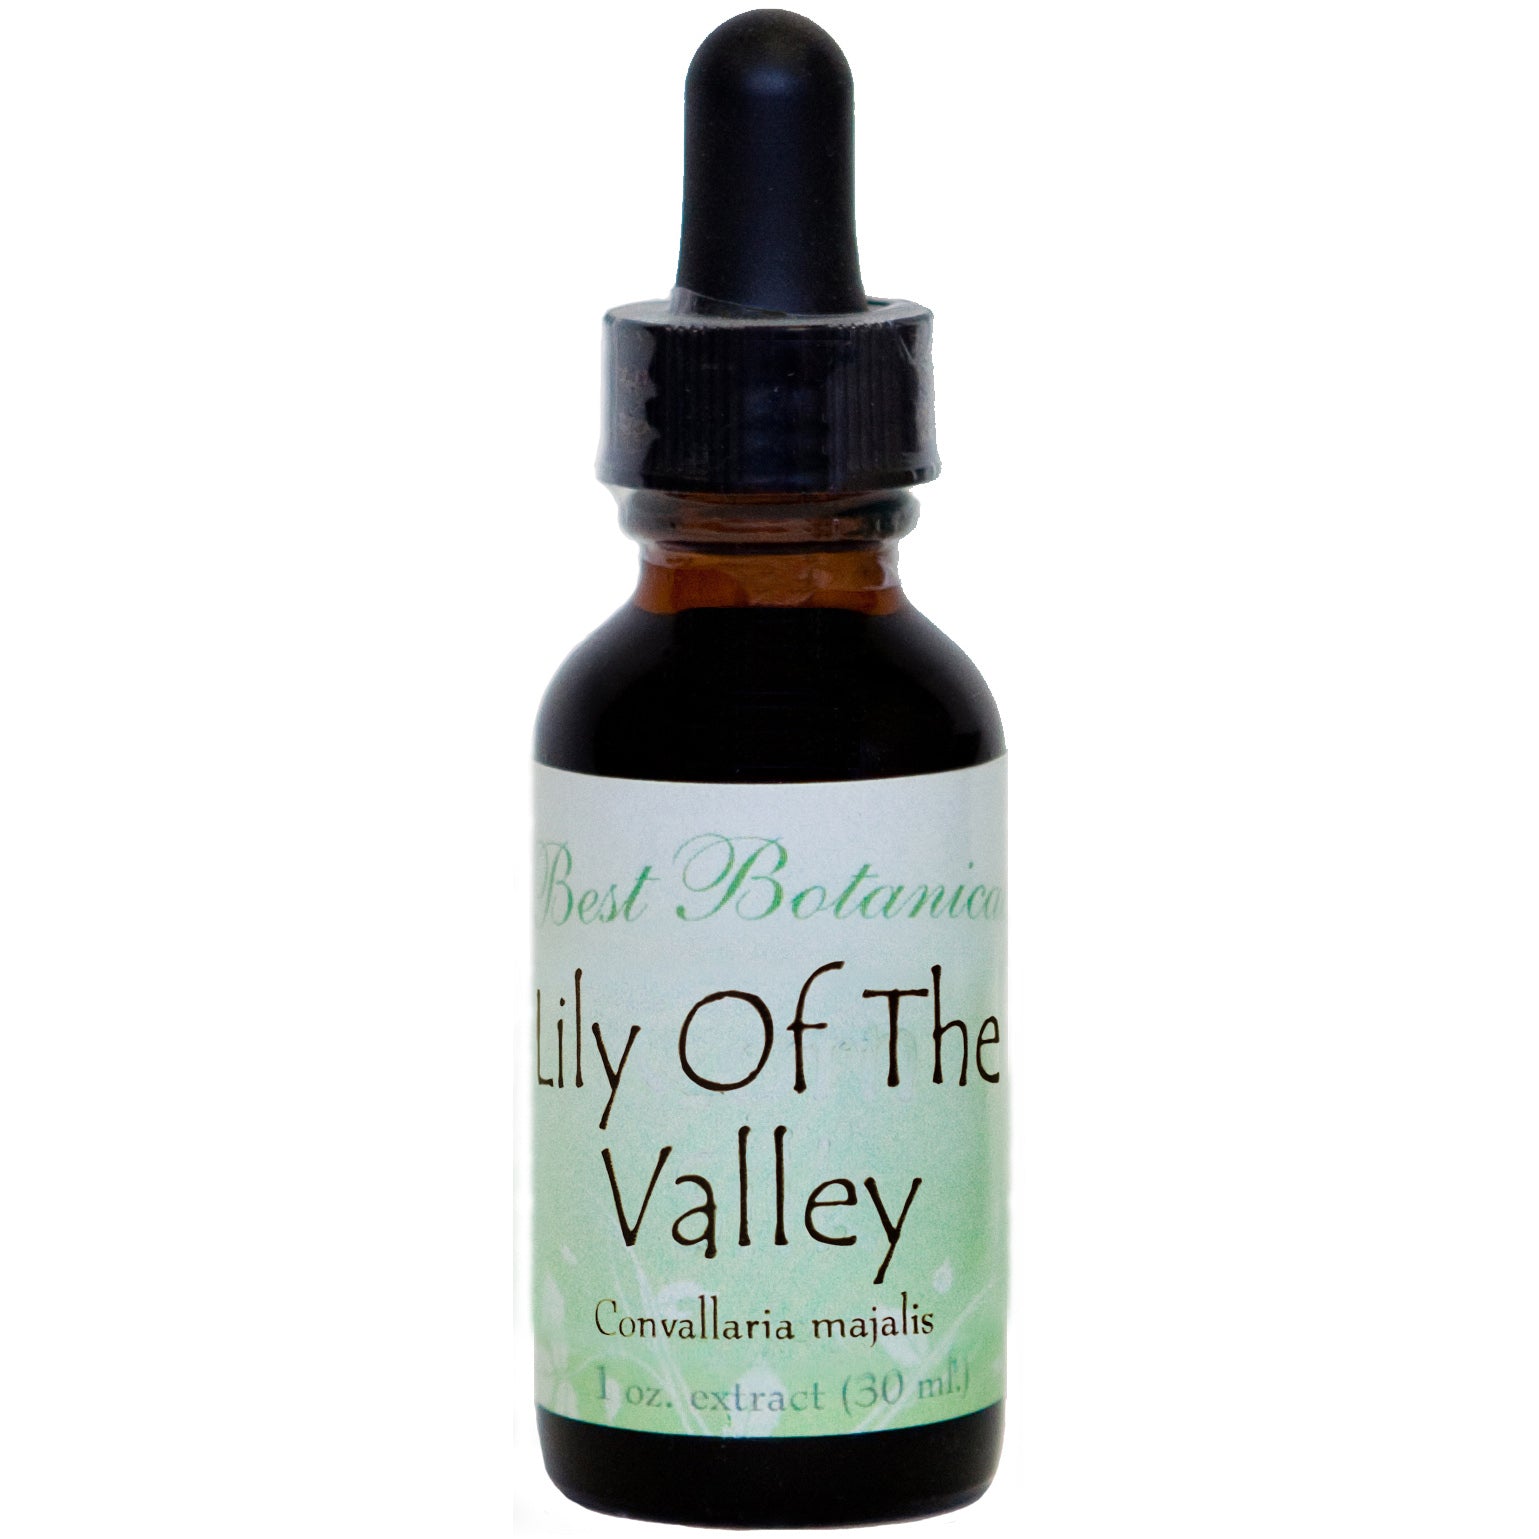 CELESTIAL ® LILY OF THE VALLEY ABSOLUTE ESSENTIAL OIL Convallaria